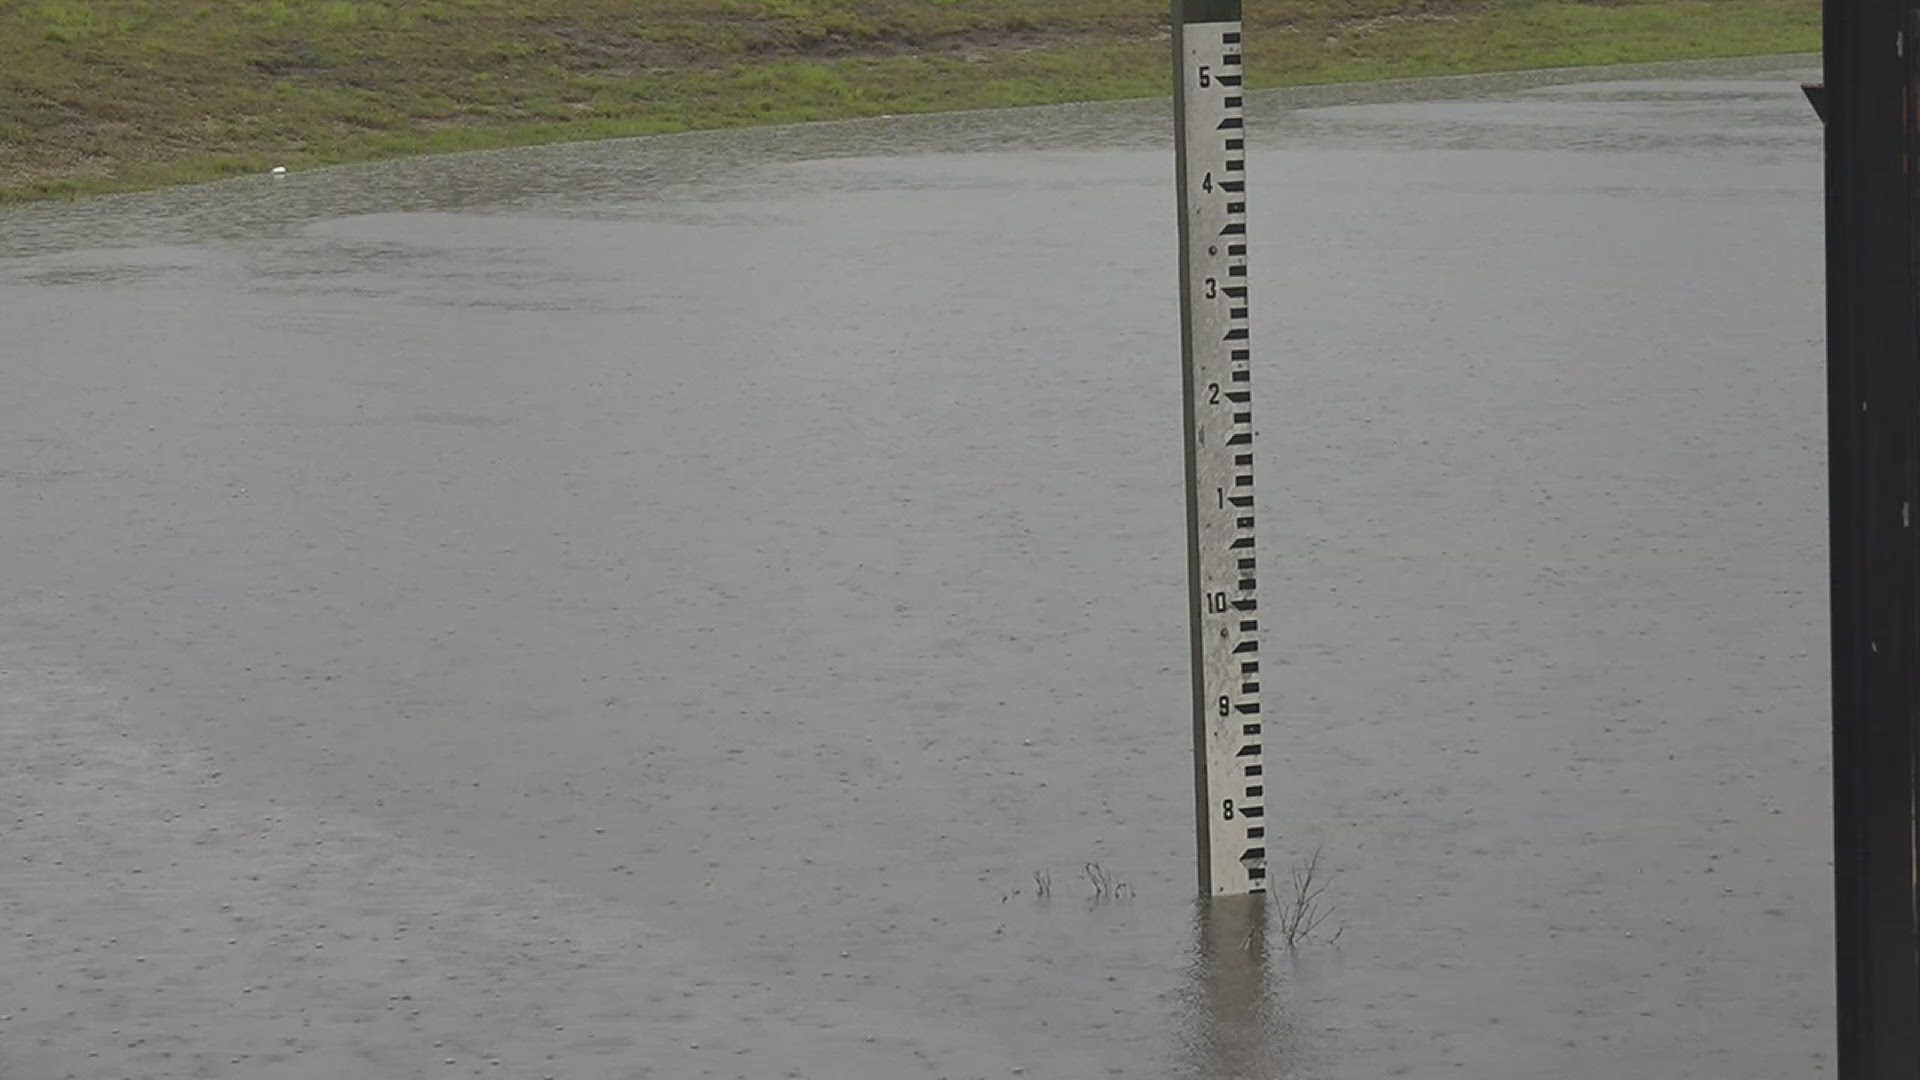 During storms, engineers keep a watchful eye on rainfall levels, which tells them where exactly to send crews to monitor retention ponds and basins.